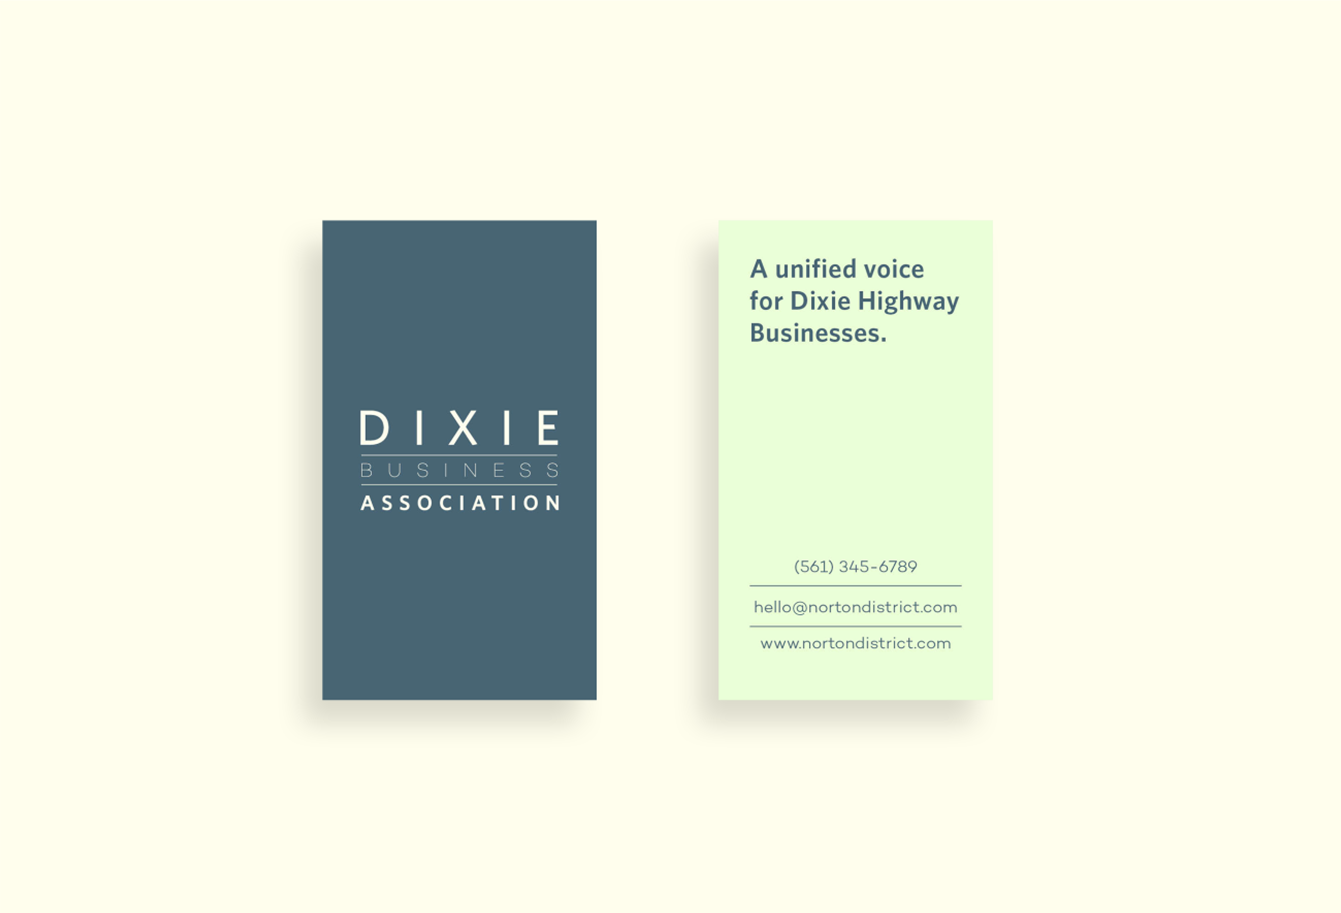 Business card mockups with the Dixie Business Association logo on the front in cream on a blue background, and the back features their tagline "A unified voice for Dixie Highway businesses", and contact information on light green background.